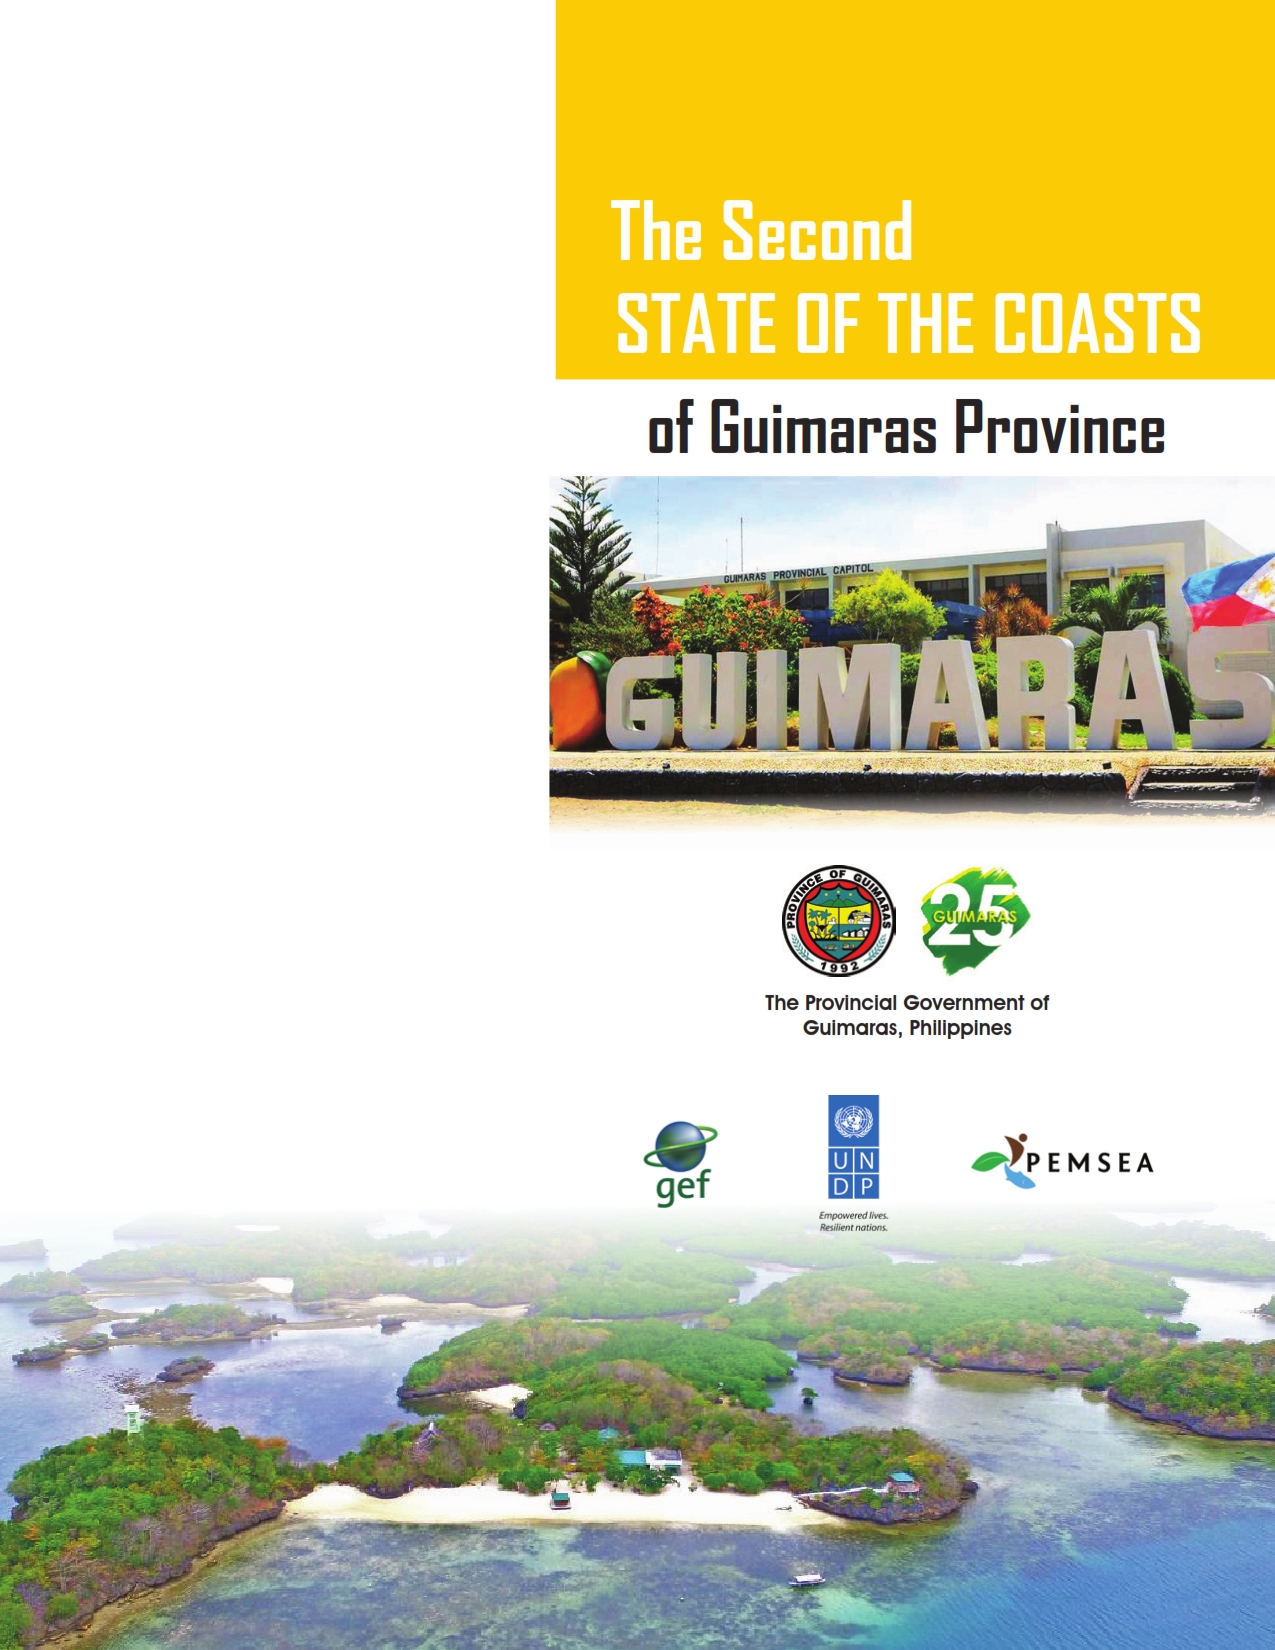 Second State of the Coasts of Guimaras Province